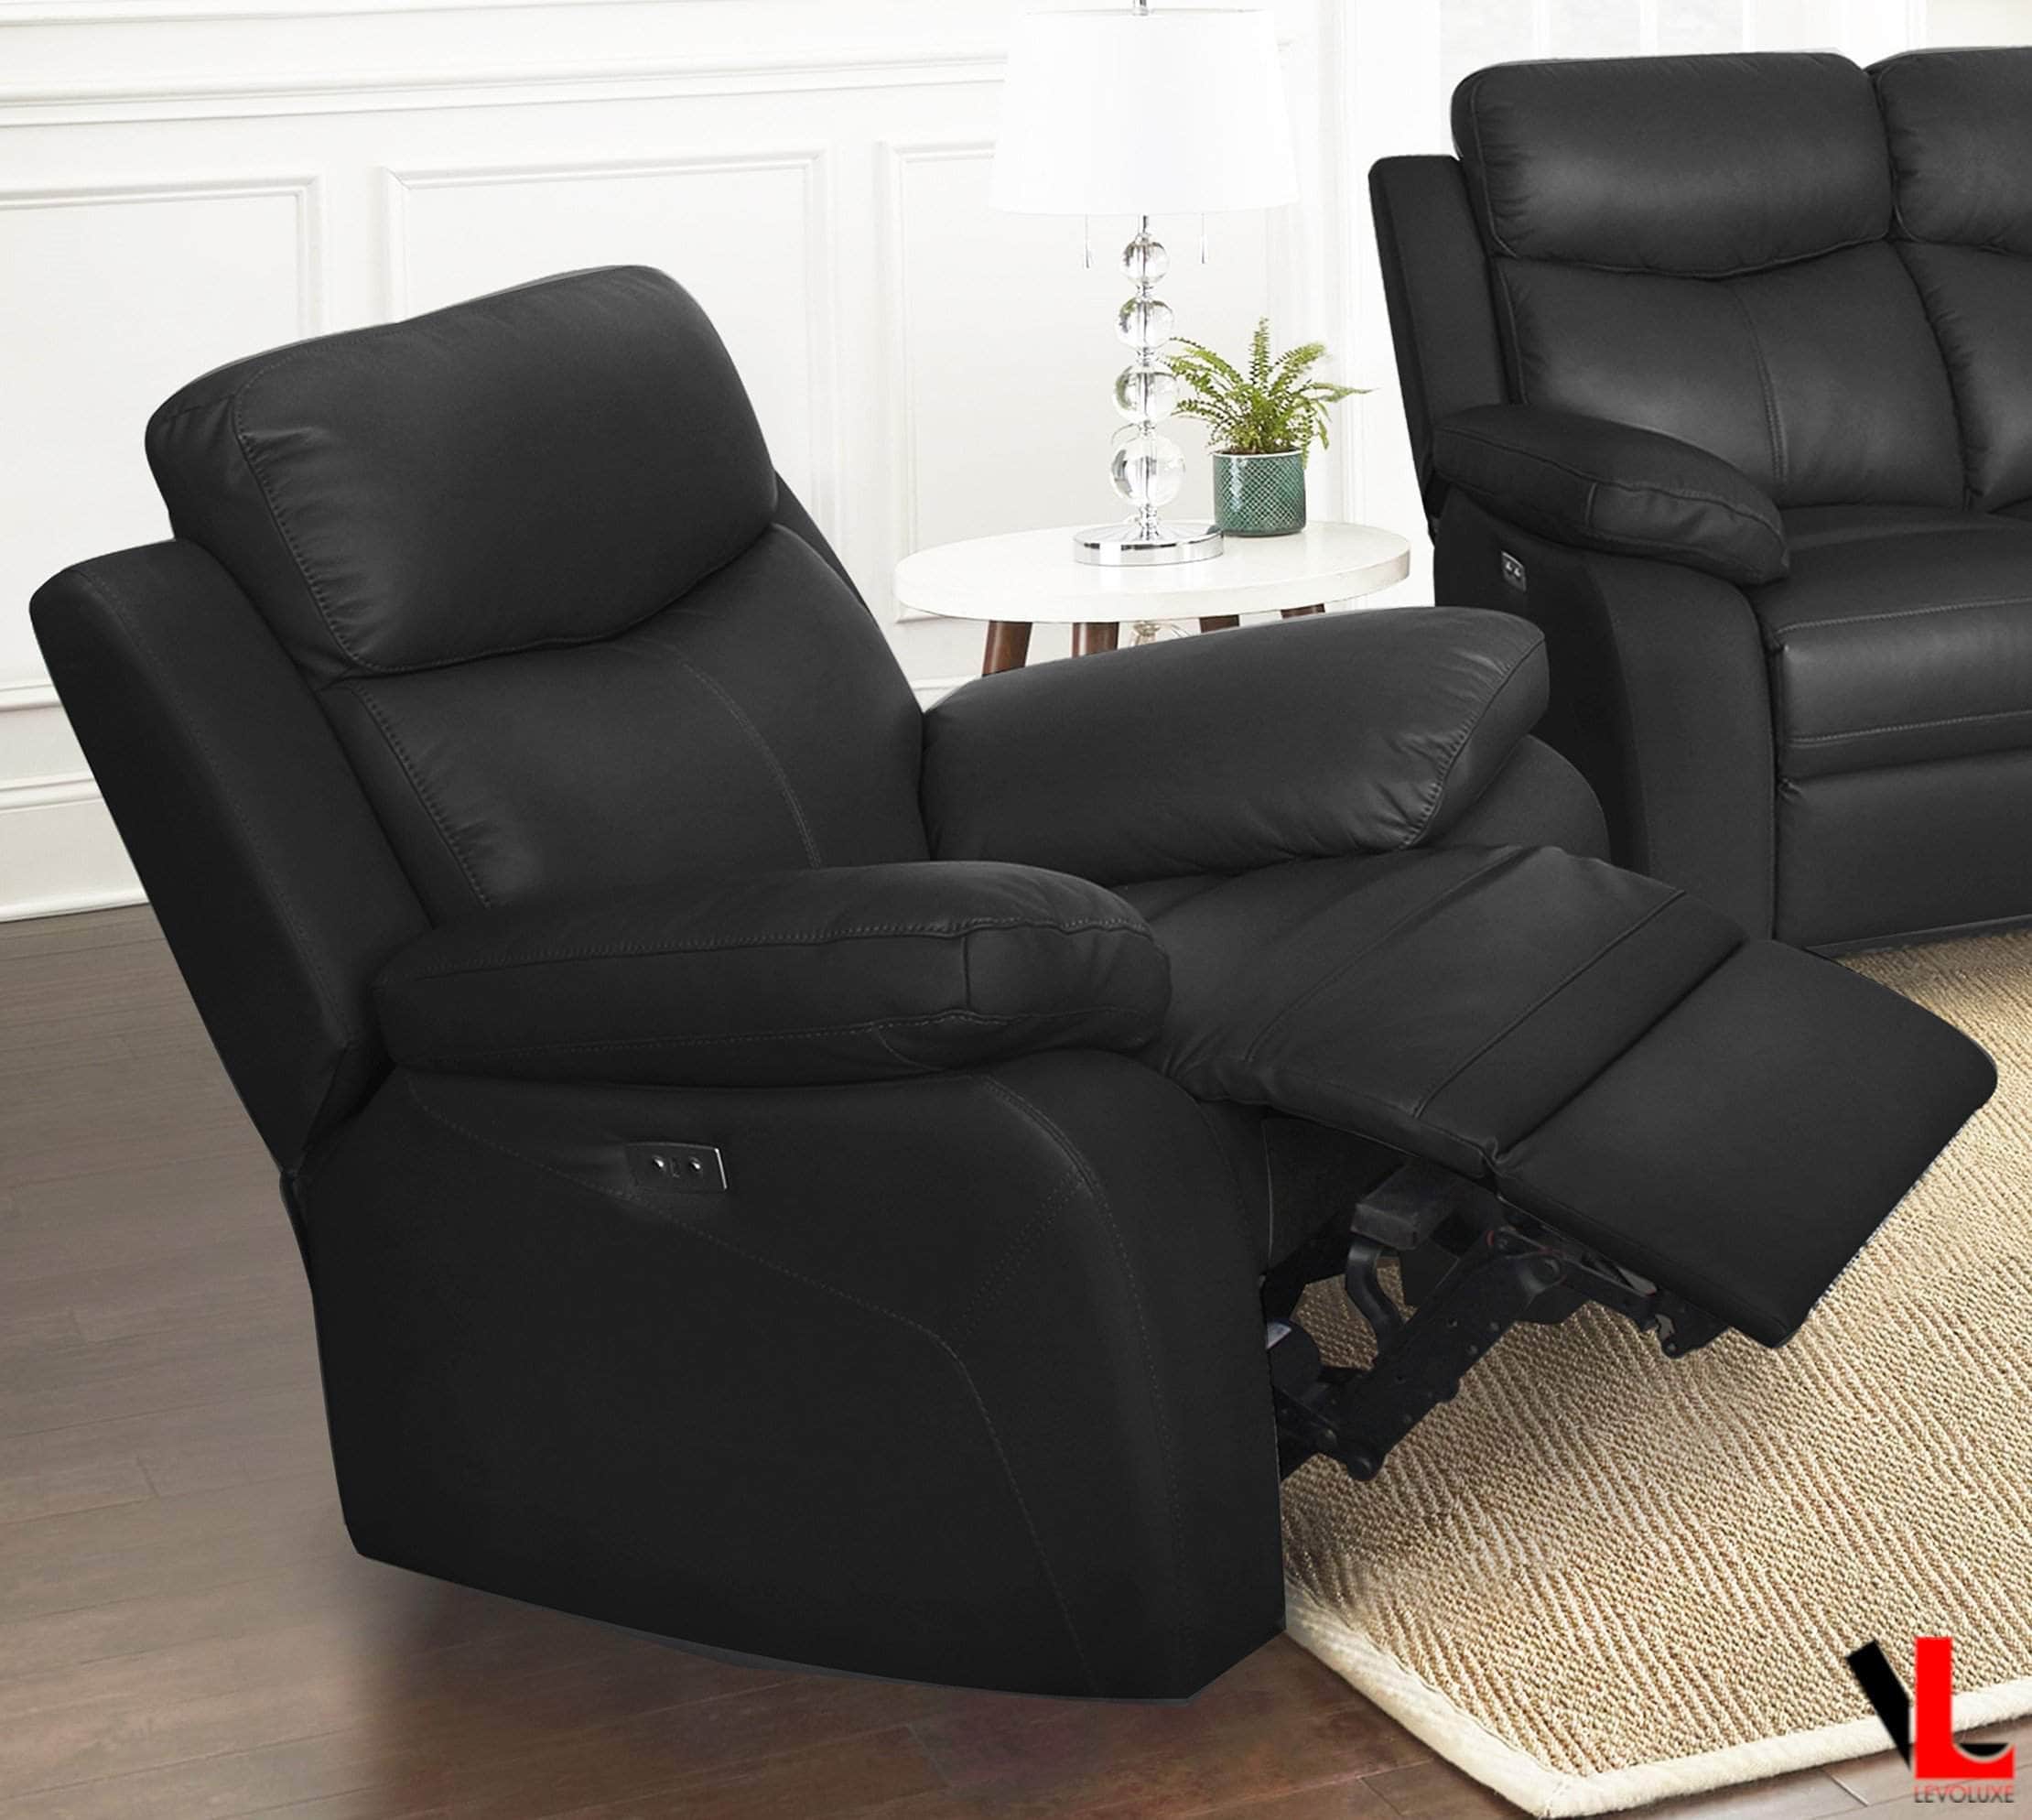 Levoluxe Aveon 38.5 Pillow Top Arm Reclining Chair in Leather